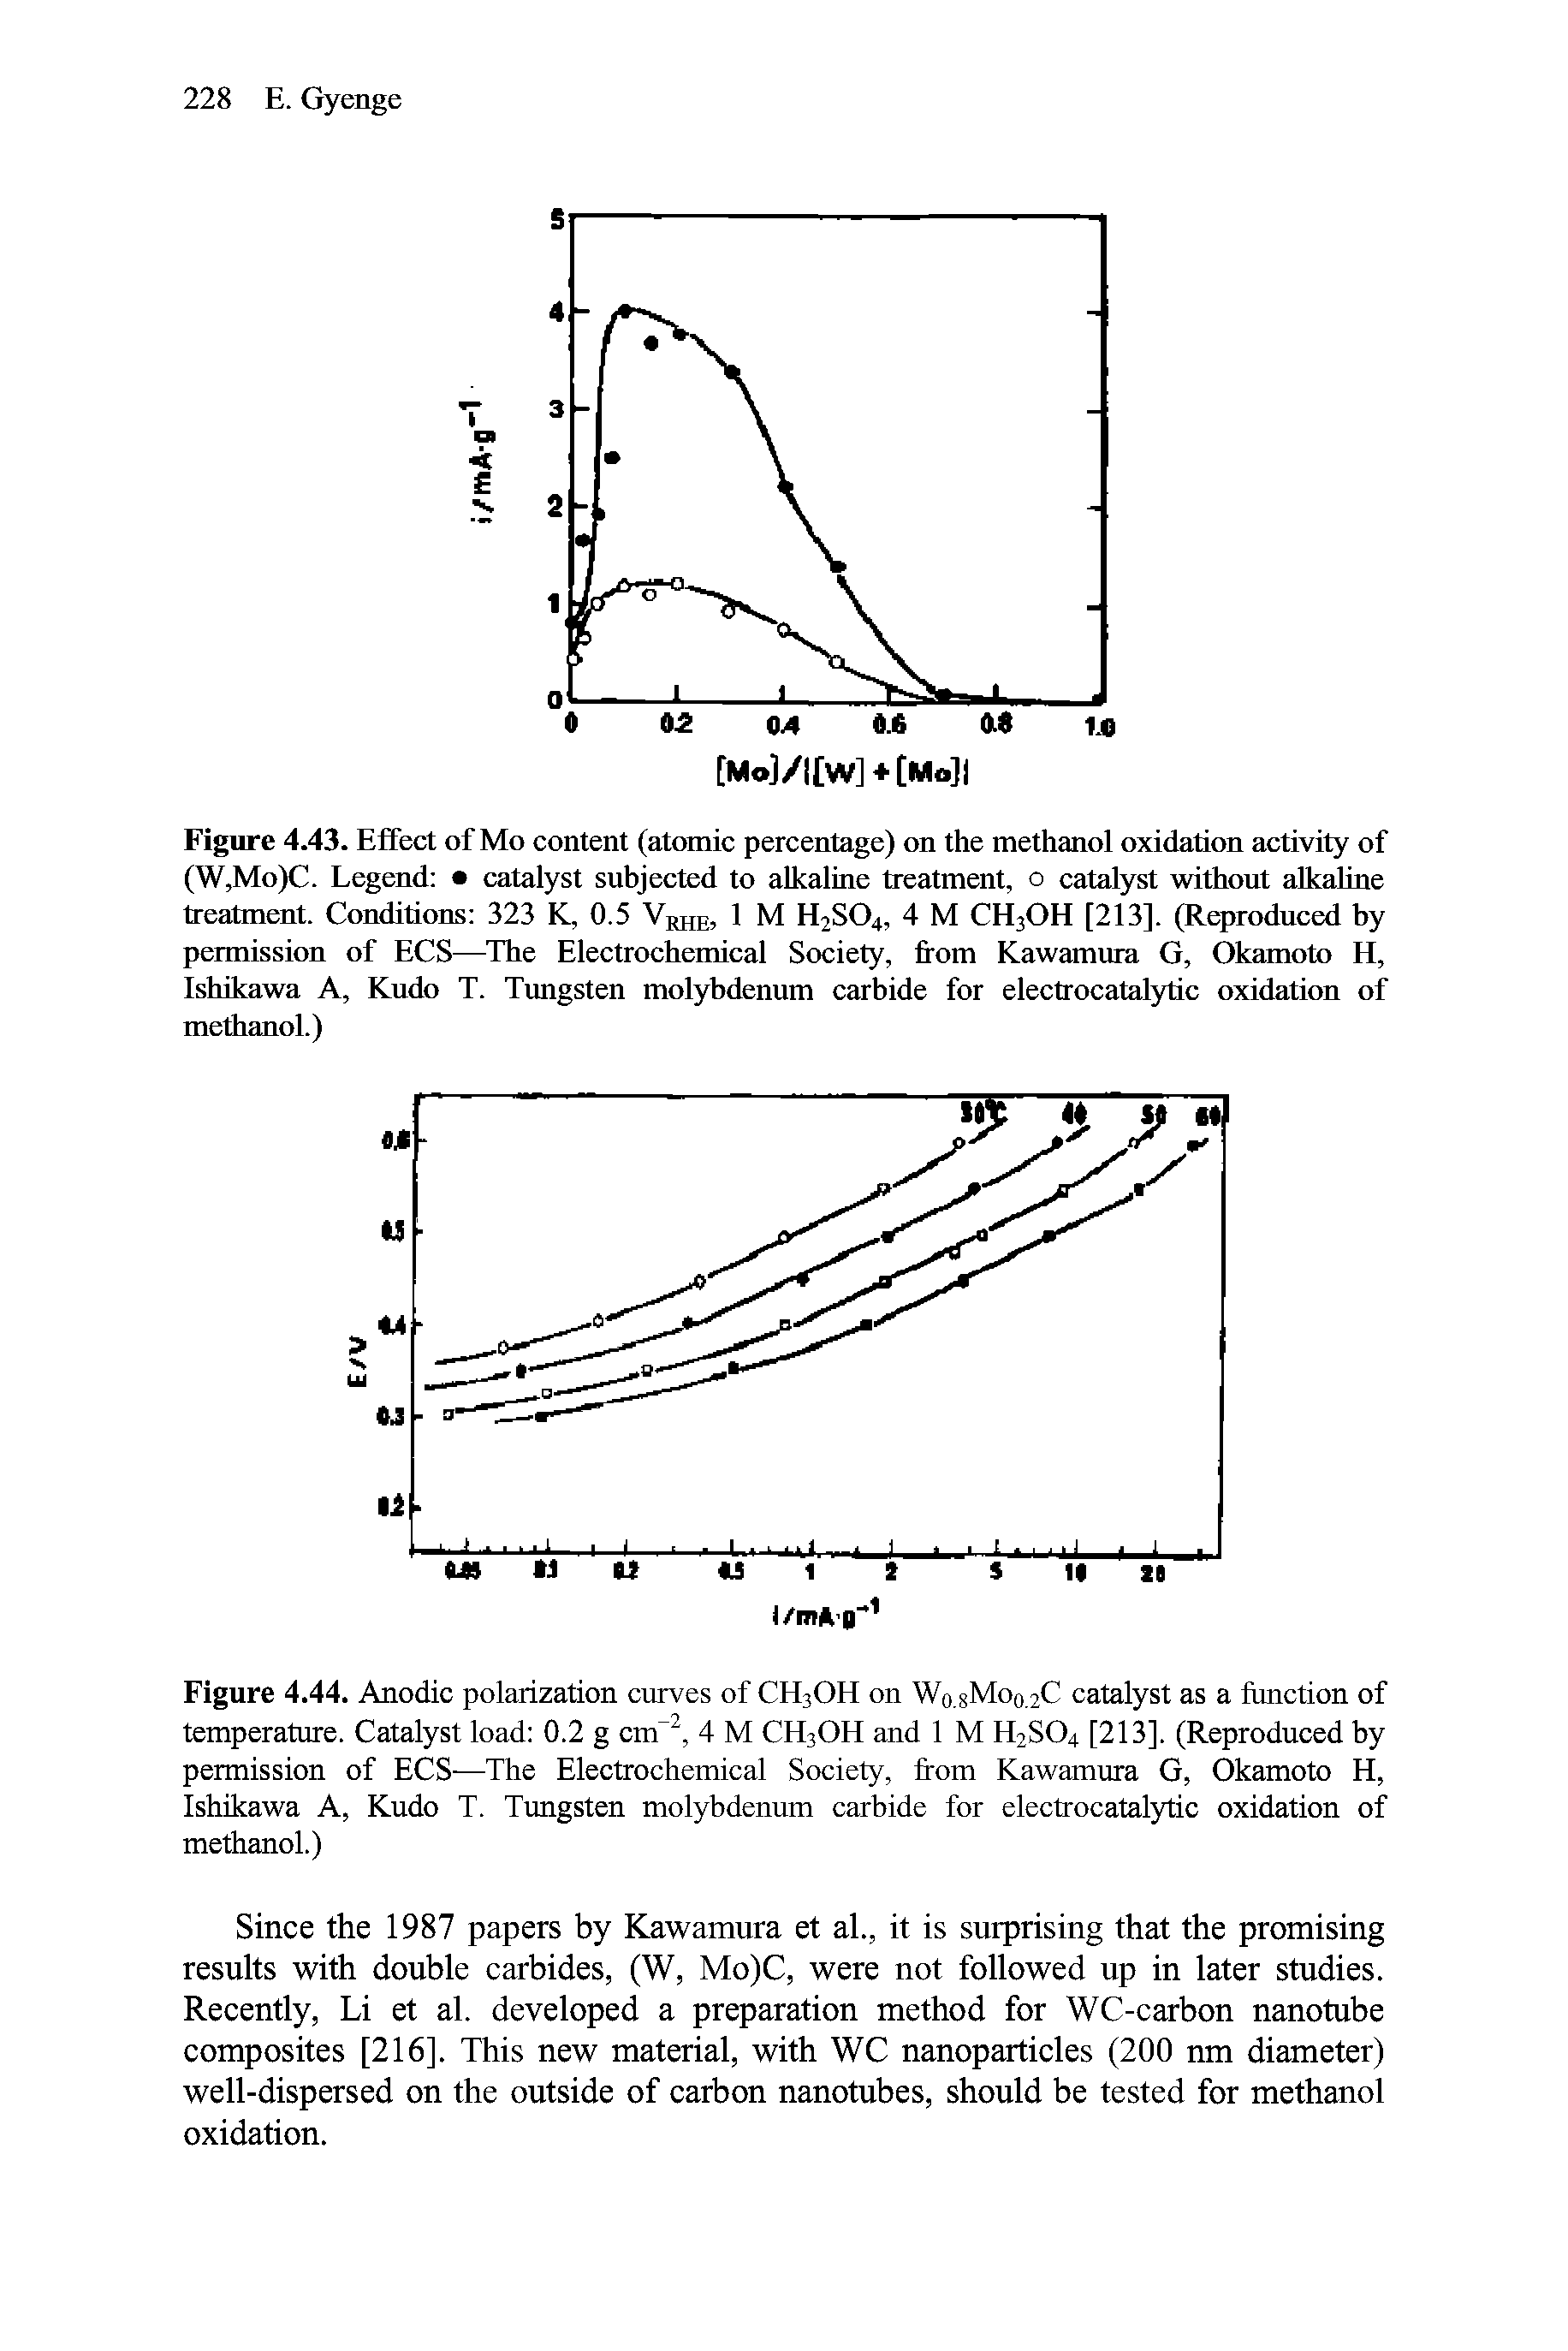 Figure 4.44. Anodic polarization curves of CH3OH on Wo,8Moo,2C catalyst as a function of temperature. Catalyst load 0.2 g cm , 4 M CH3OH and 1 M H2SO4 [213]. (Reproduced by permission of ECS—The Electrochemical Society, from Kawamura G, Okamoto H, Ishikawa A, Kudo T. Tungsten molybdenum carbide for electrocatalytic oxidation of methanol.)...